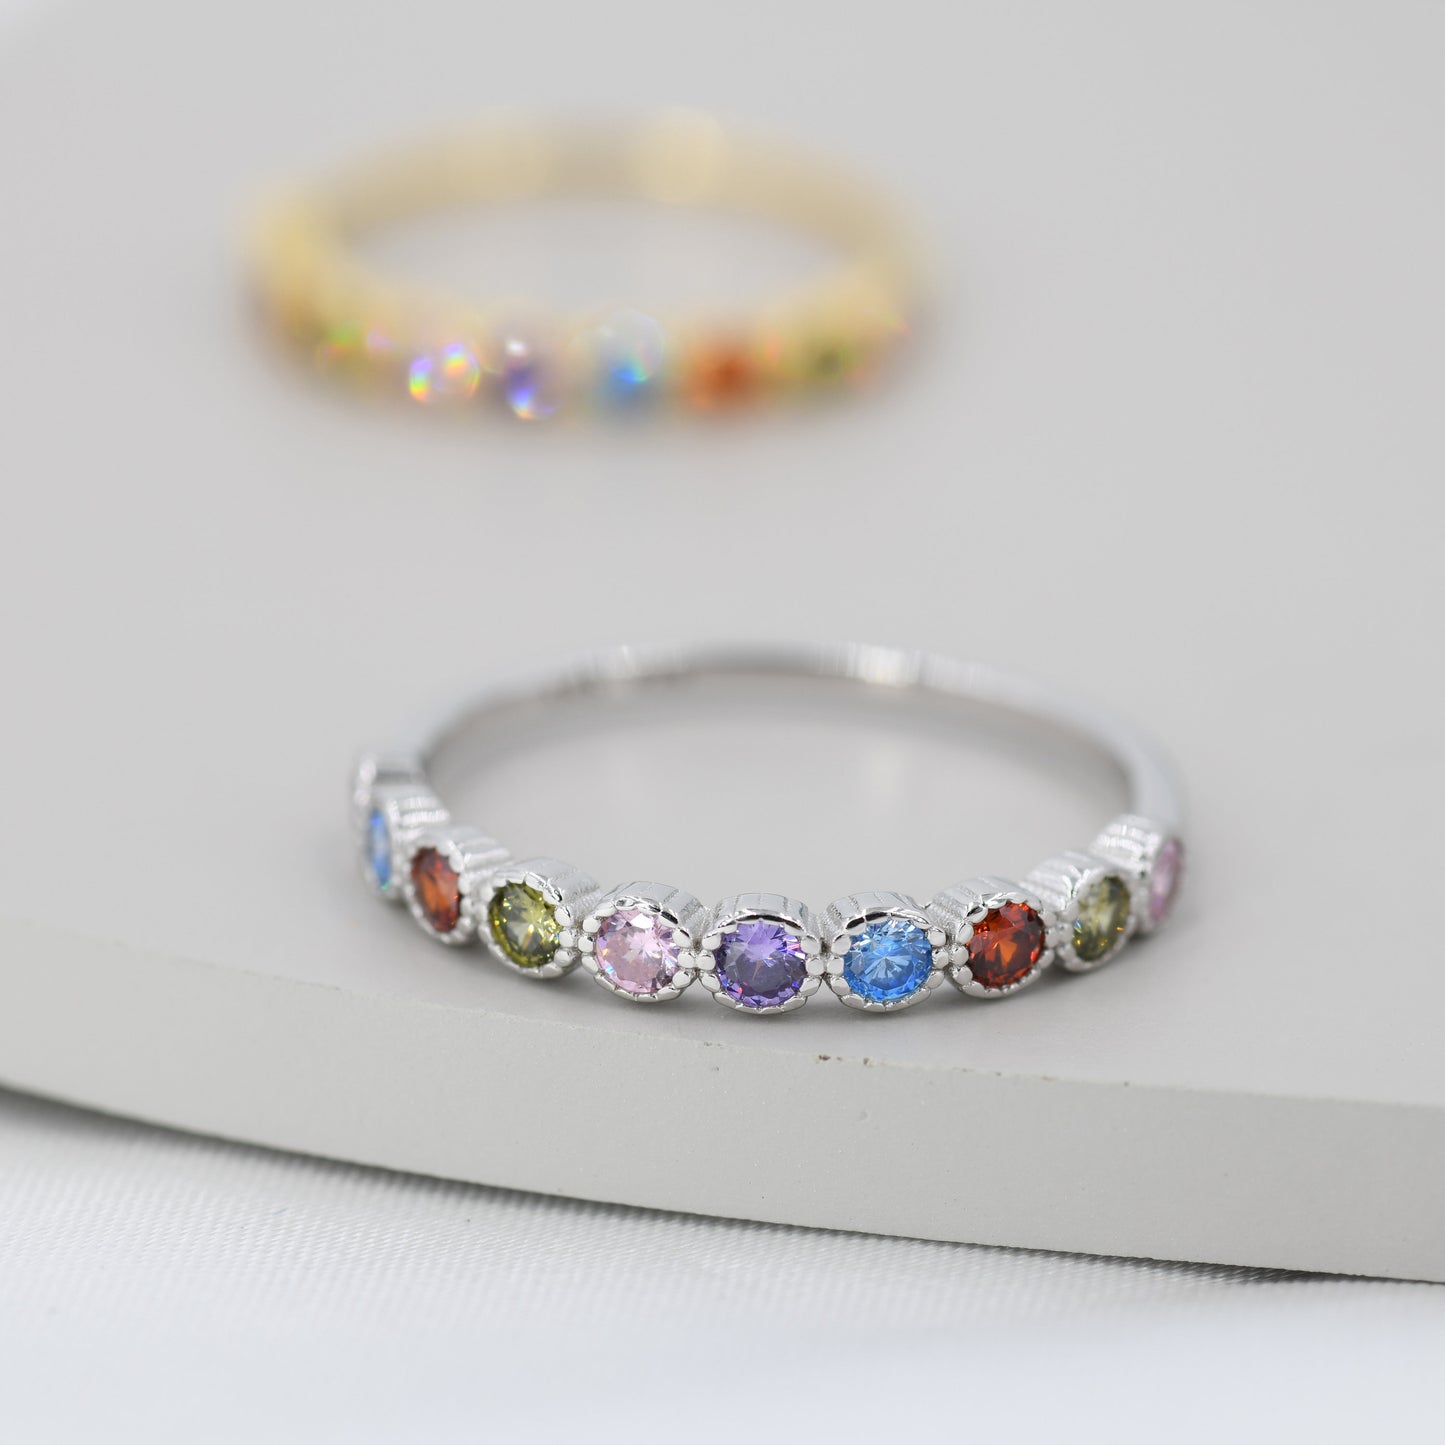 Multicolour CZ Infinity Ring in Sterling Silver, Silver or Gold, Dotted Bezel CZ Ring, Simulated Tourmaline US 5 - 8